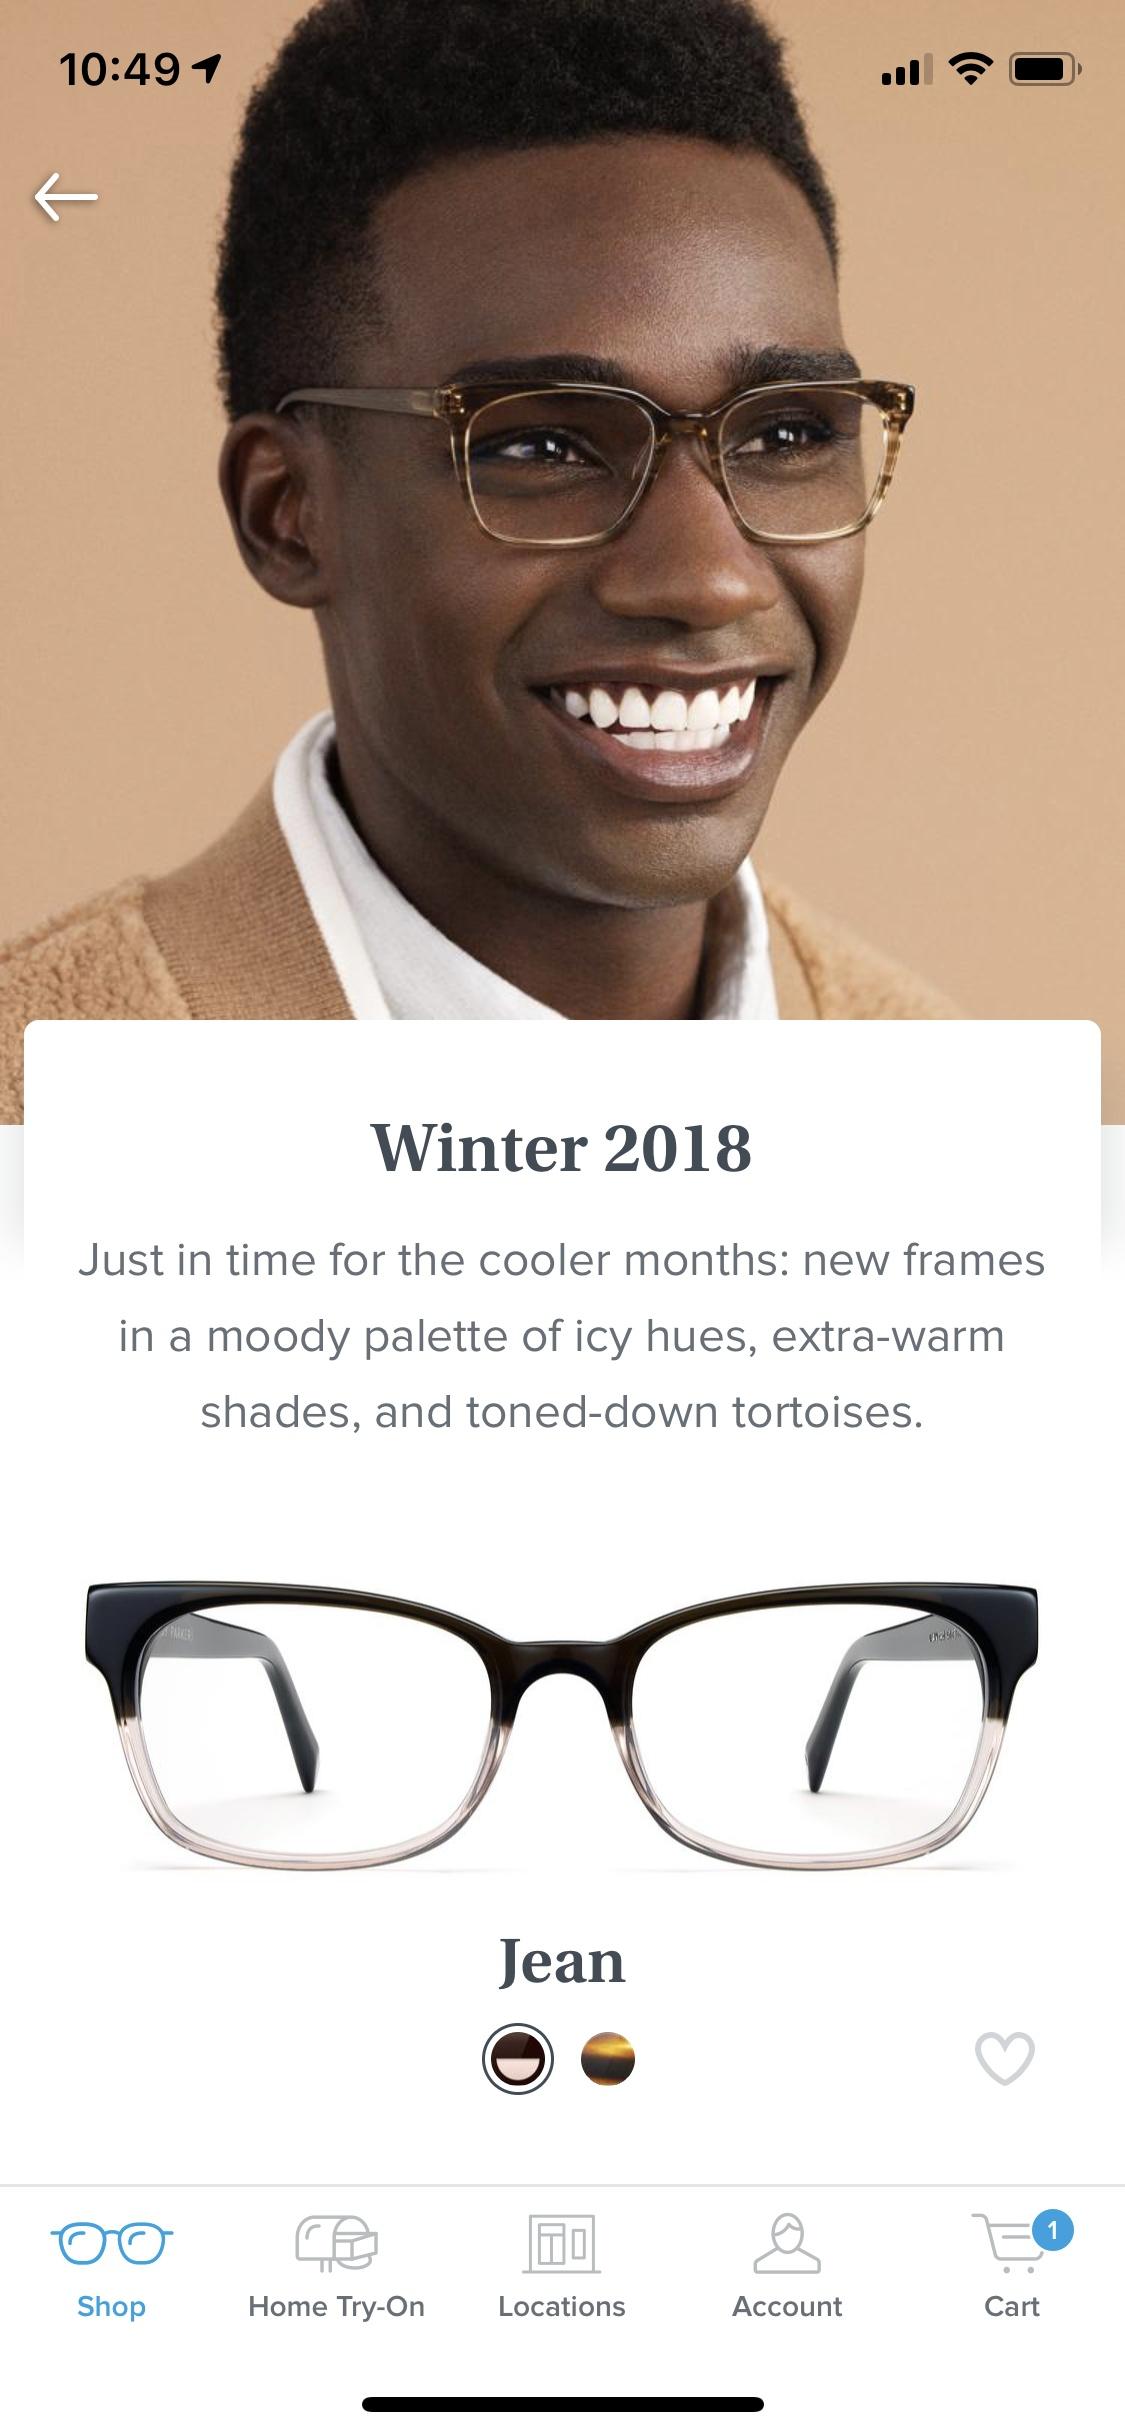 Glasses by Warby Parker  商品详情详情